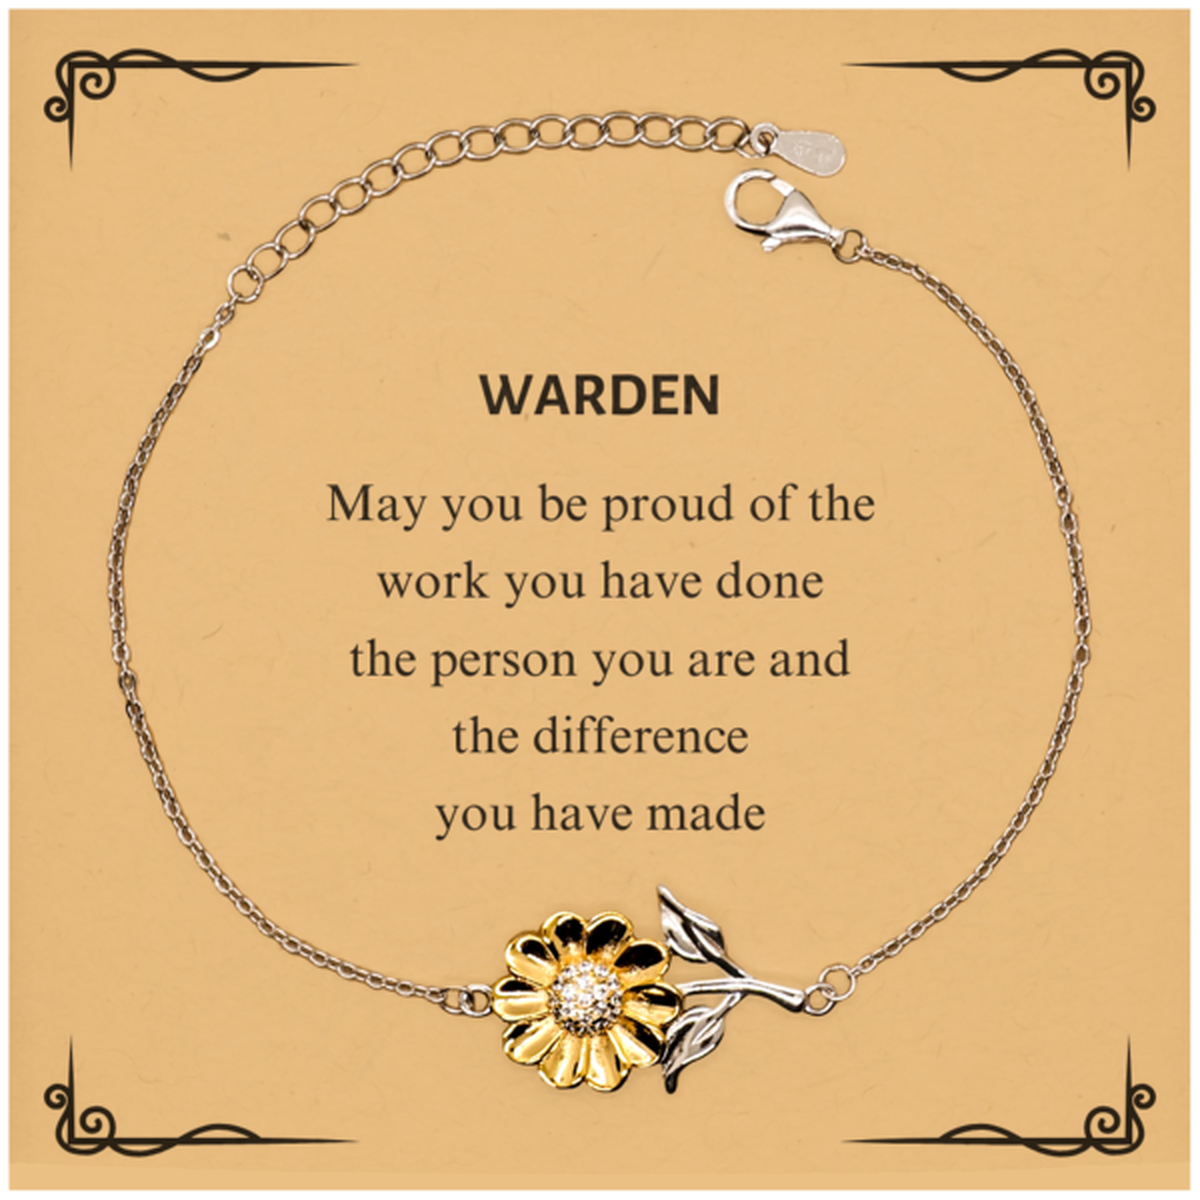 Warden May you be proud of the work you have done, Retirement Warden Sunflower Bracelet for Colleague Appreciation Gifts Amazing for Warden